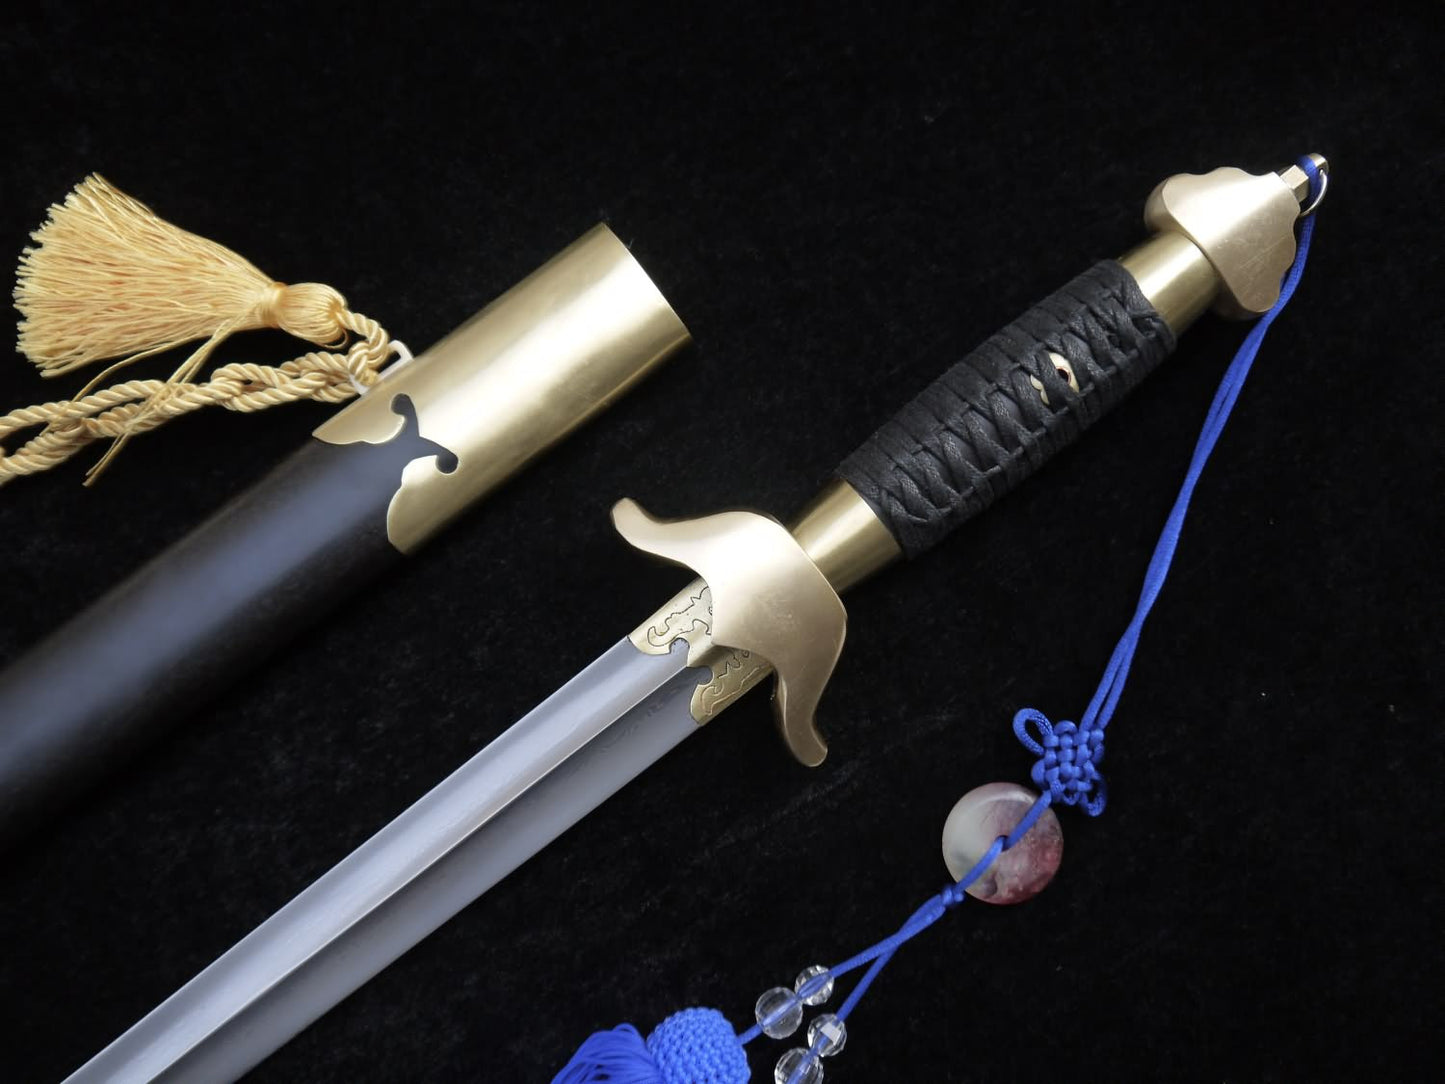 Tai Chi sword(Folded steel flexible blade,Black wood scabbard,Copper fitted)Length 39" - Chinese sword shop